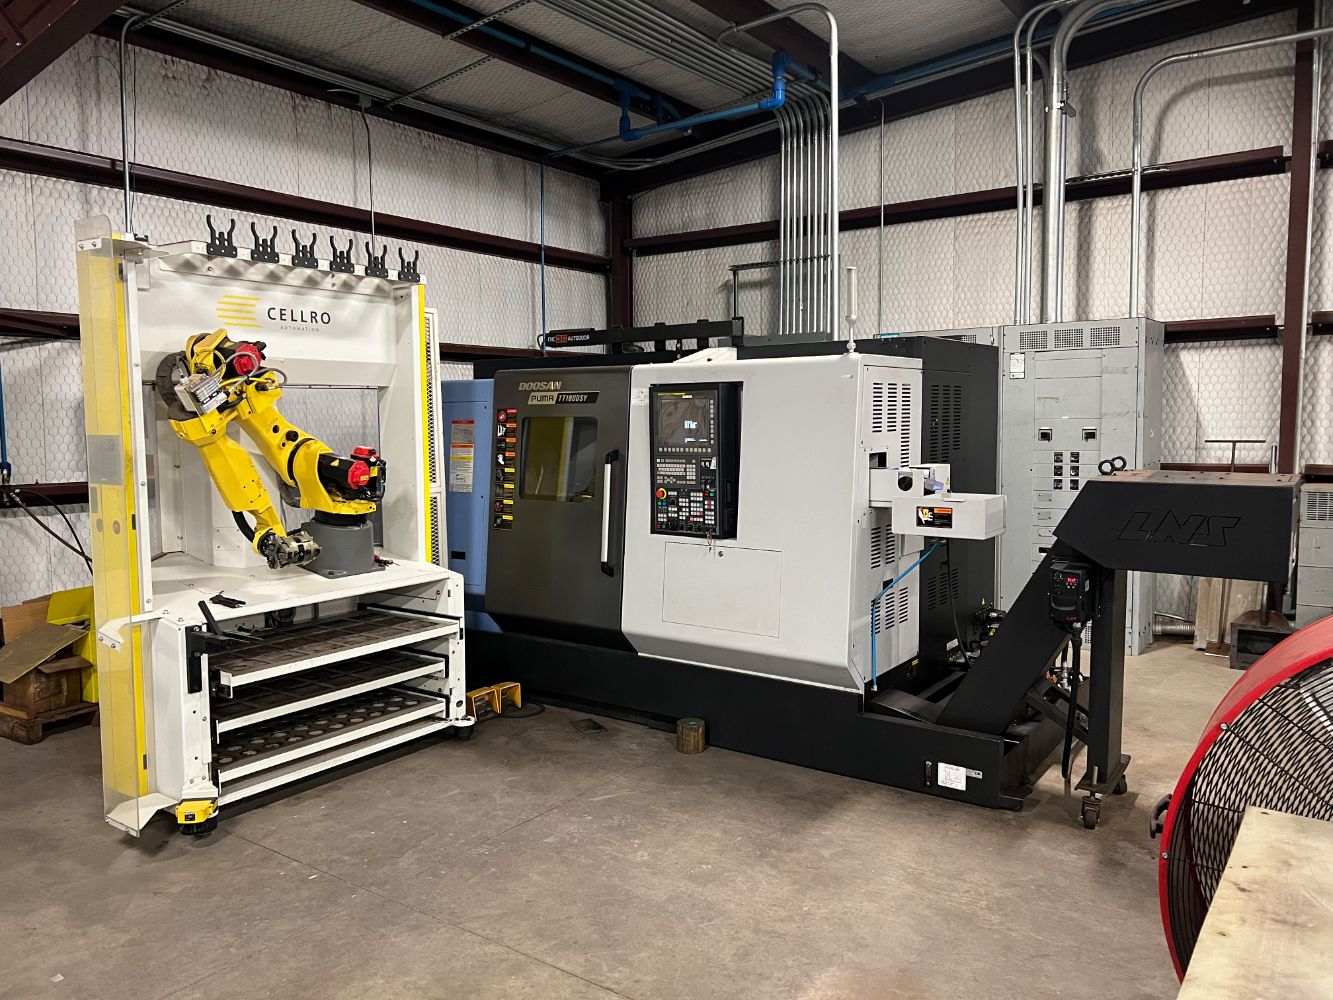 Late Model Doosan Multi Axis CNC Turning Center Auction